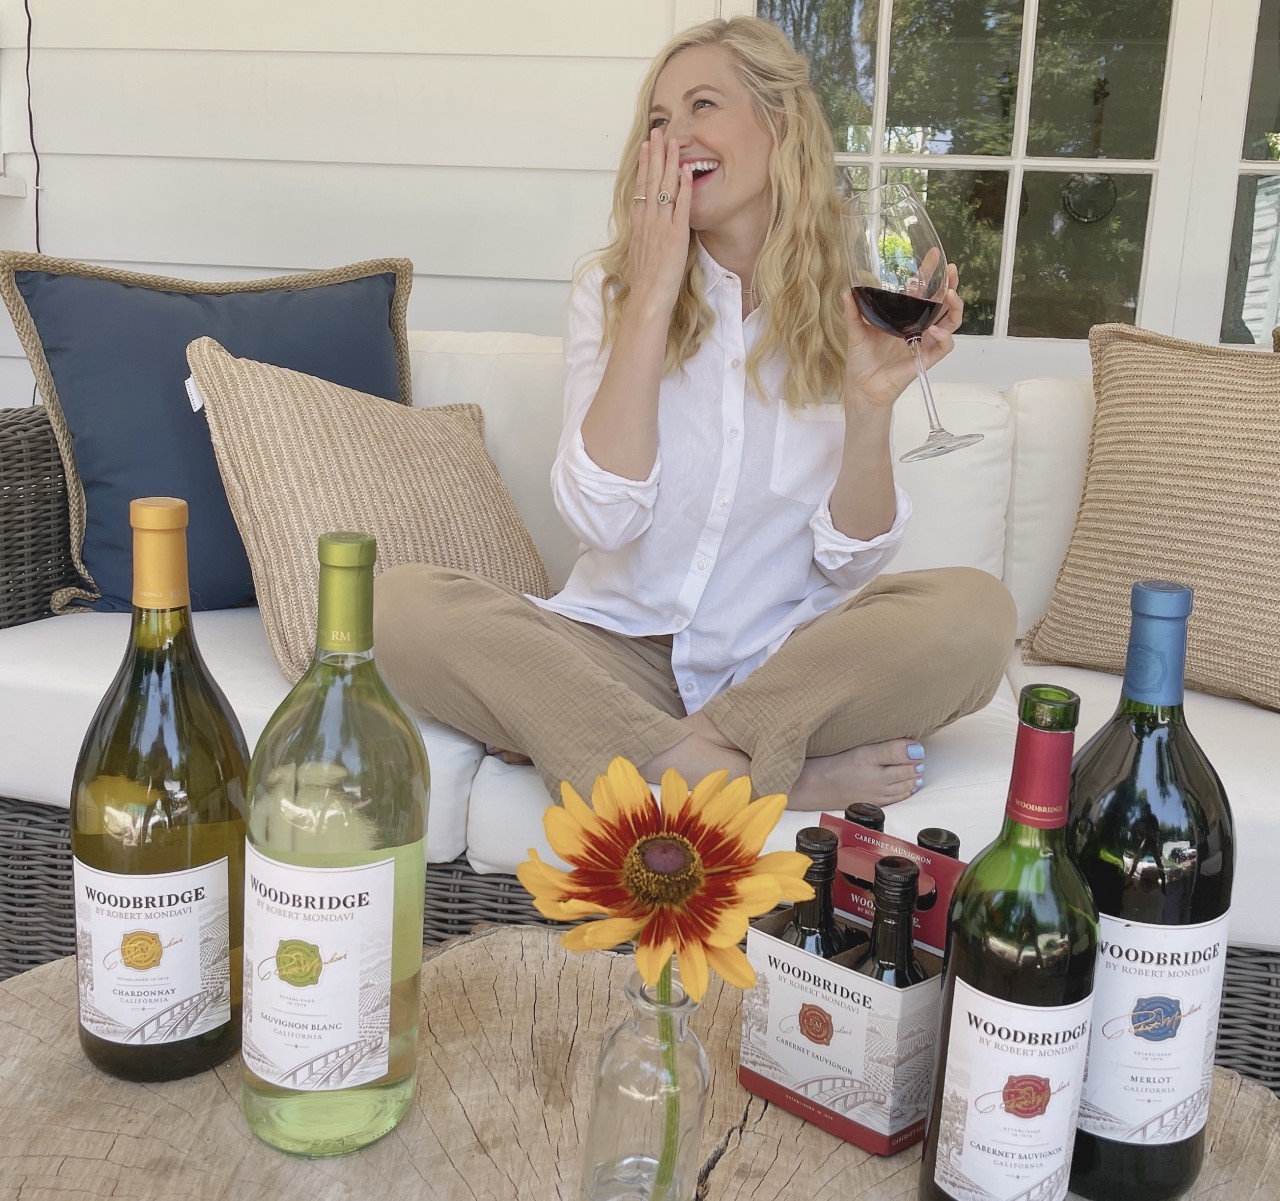 Beth Behrs smiling and holding glass of red wine with her hand over her mouth